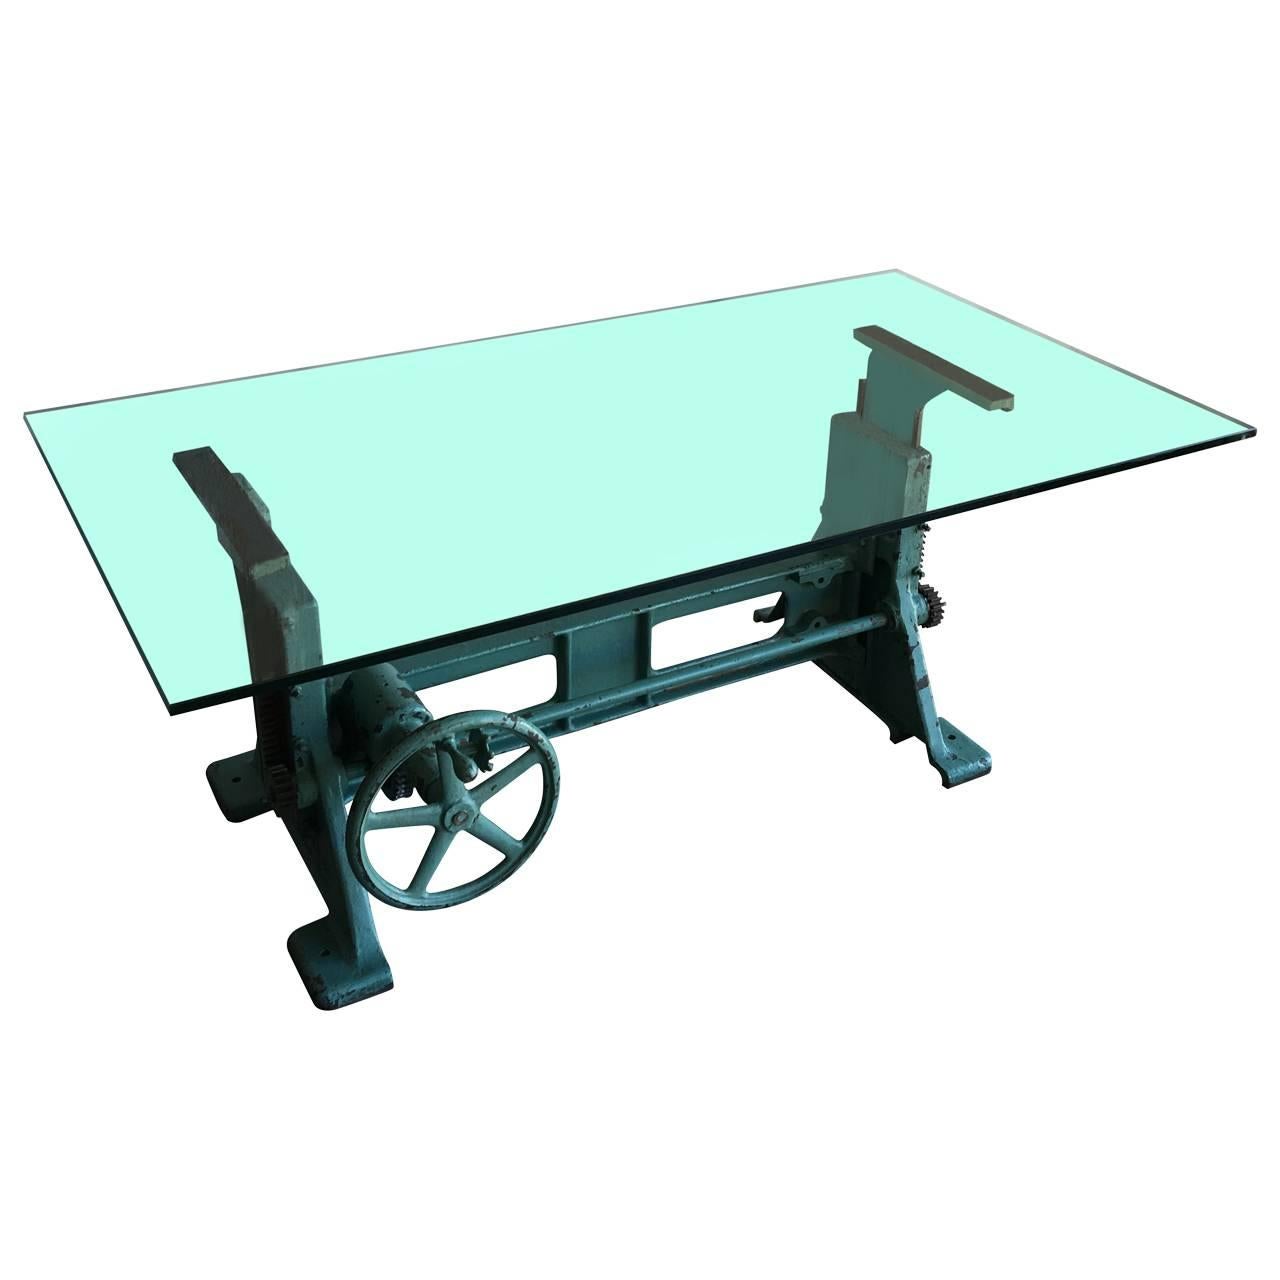 Rare original painted base glass top dining table.